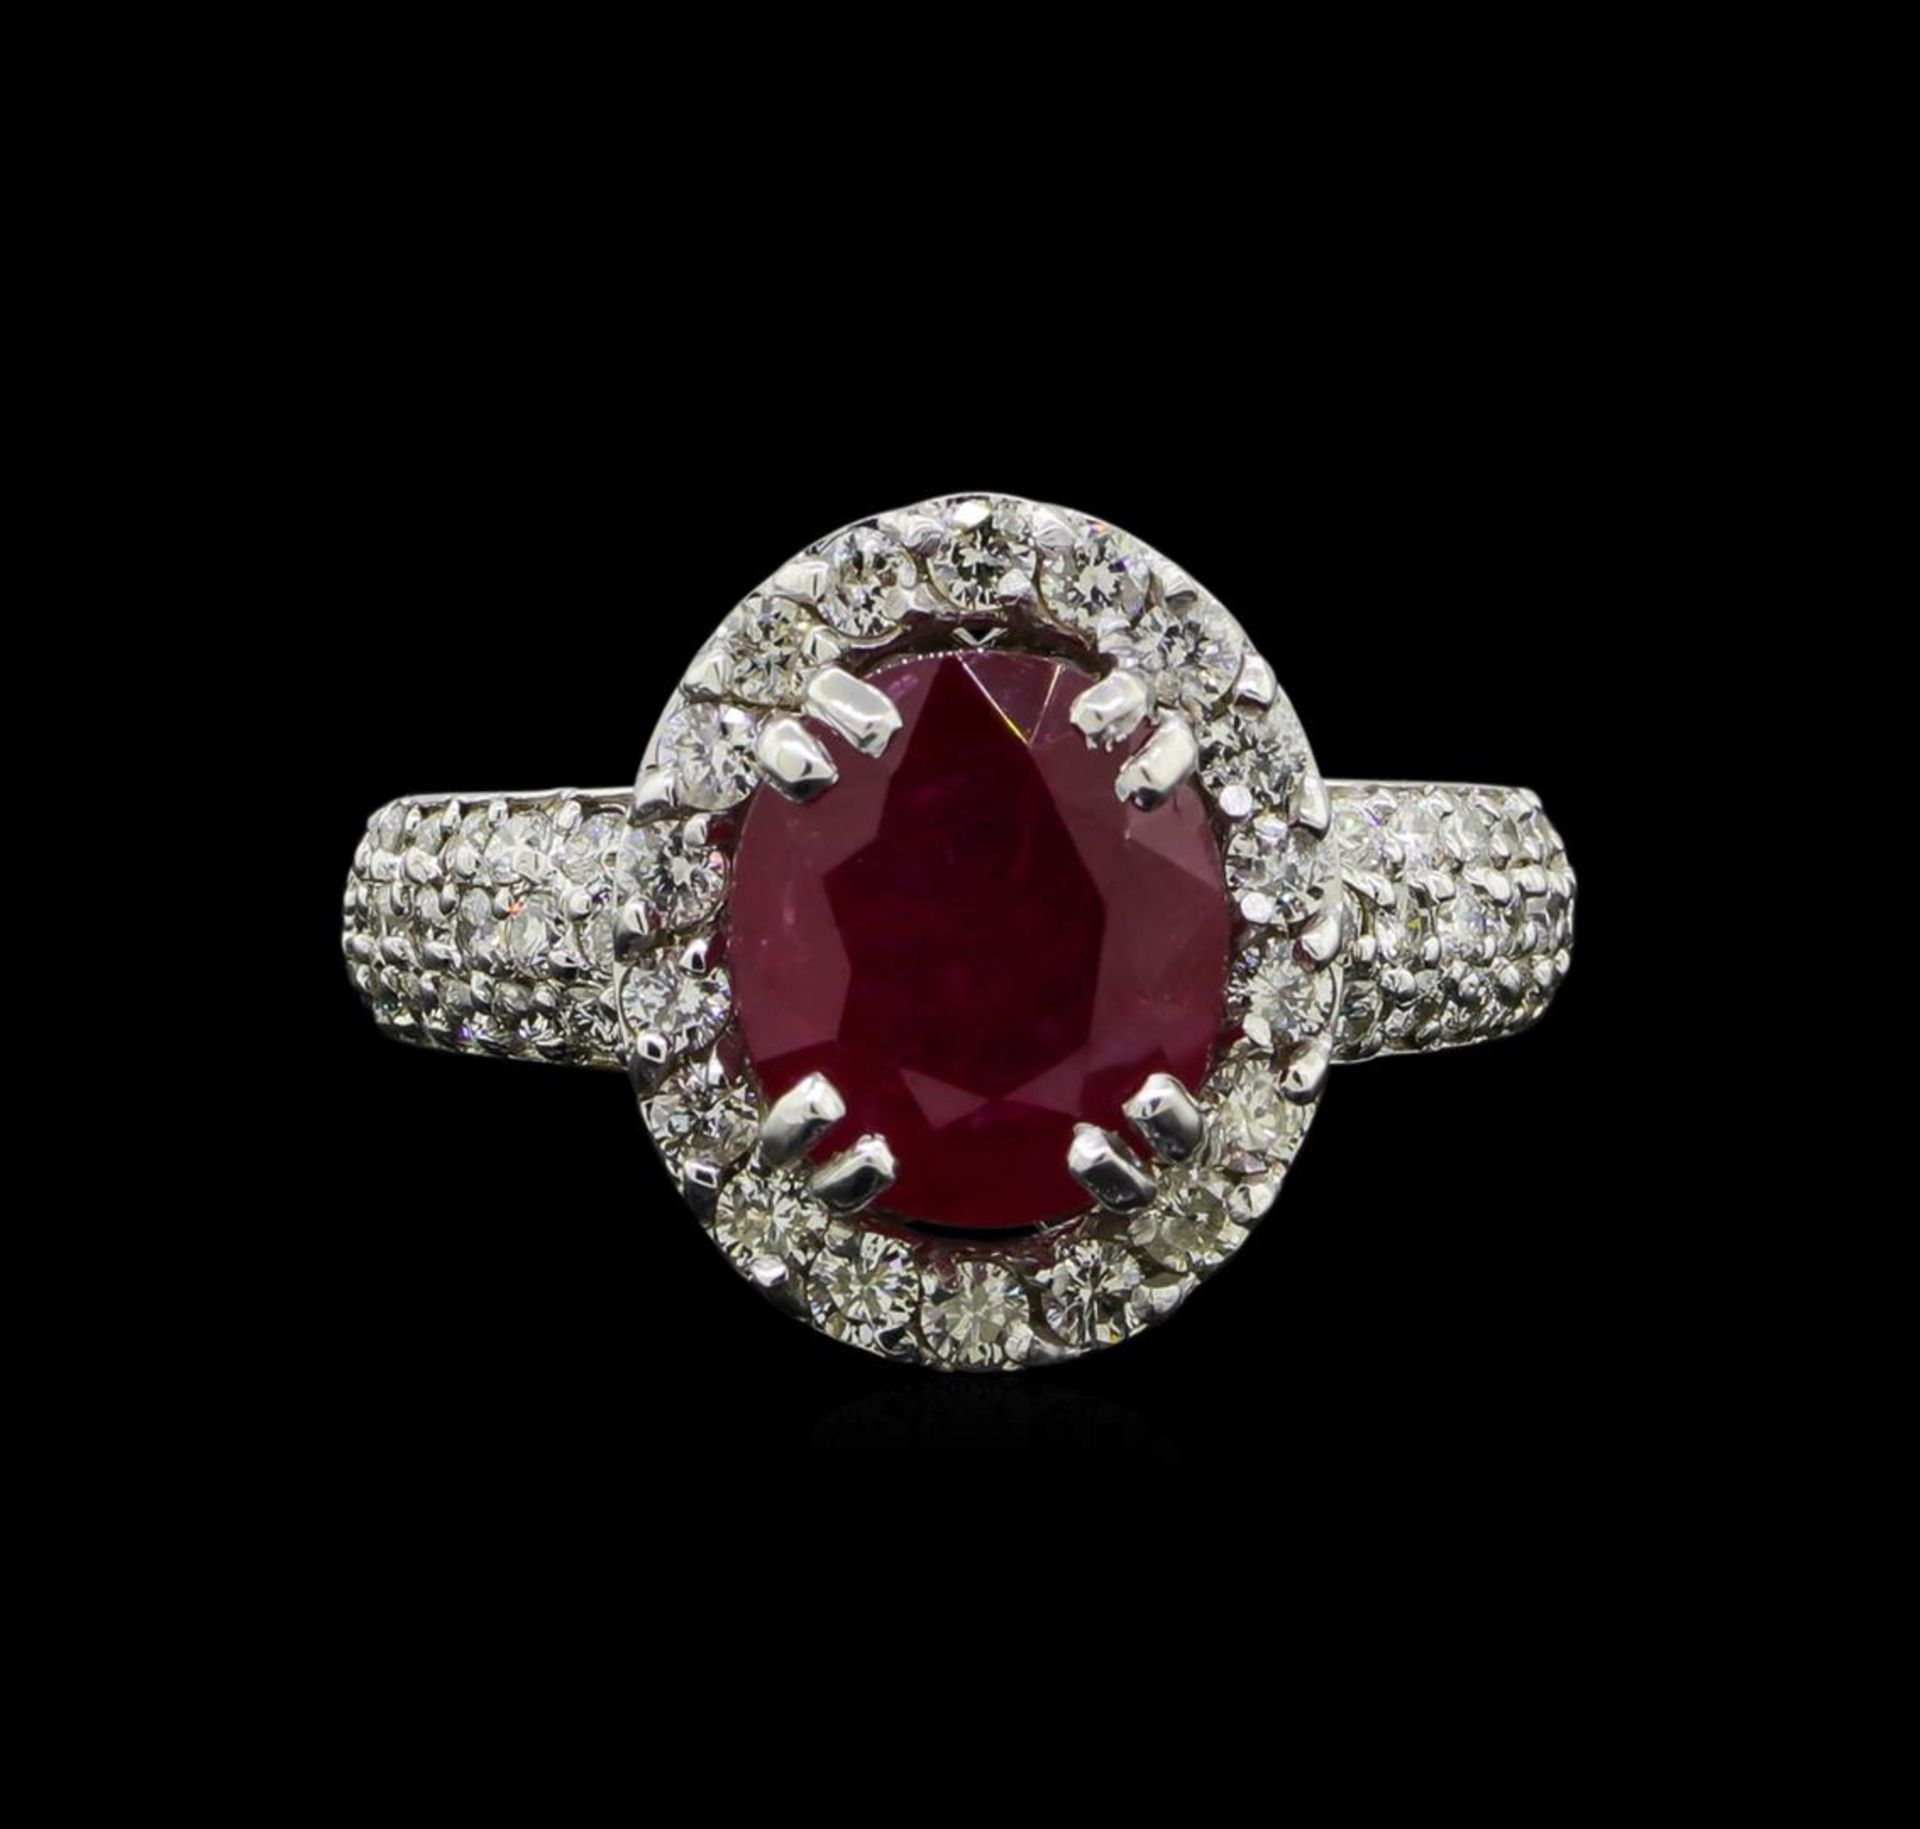 GIA Cert 3.24 ctw Ruby and Diamond Ring - 14KT White Gold - Image 2 of 6